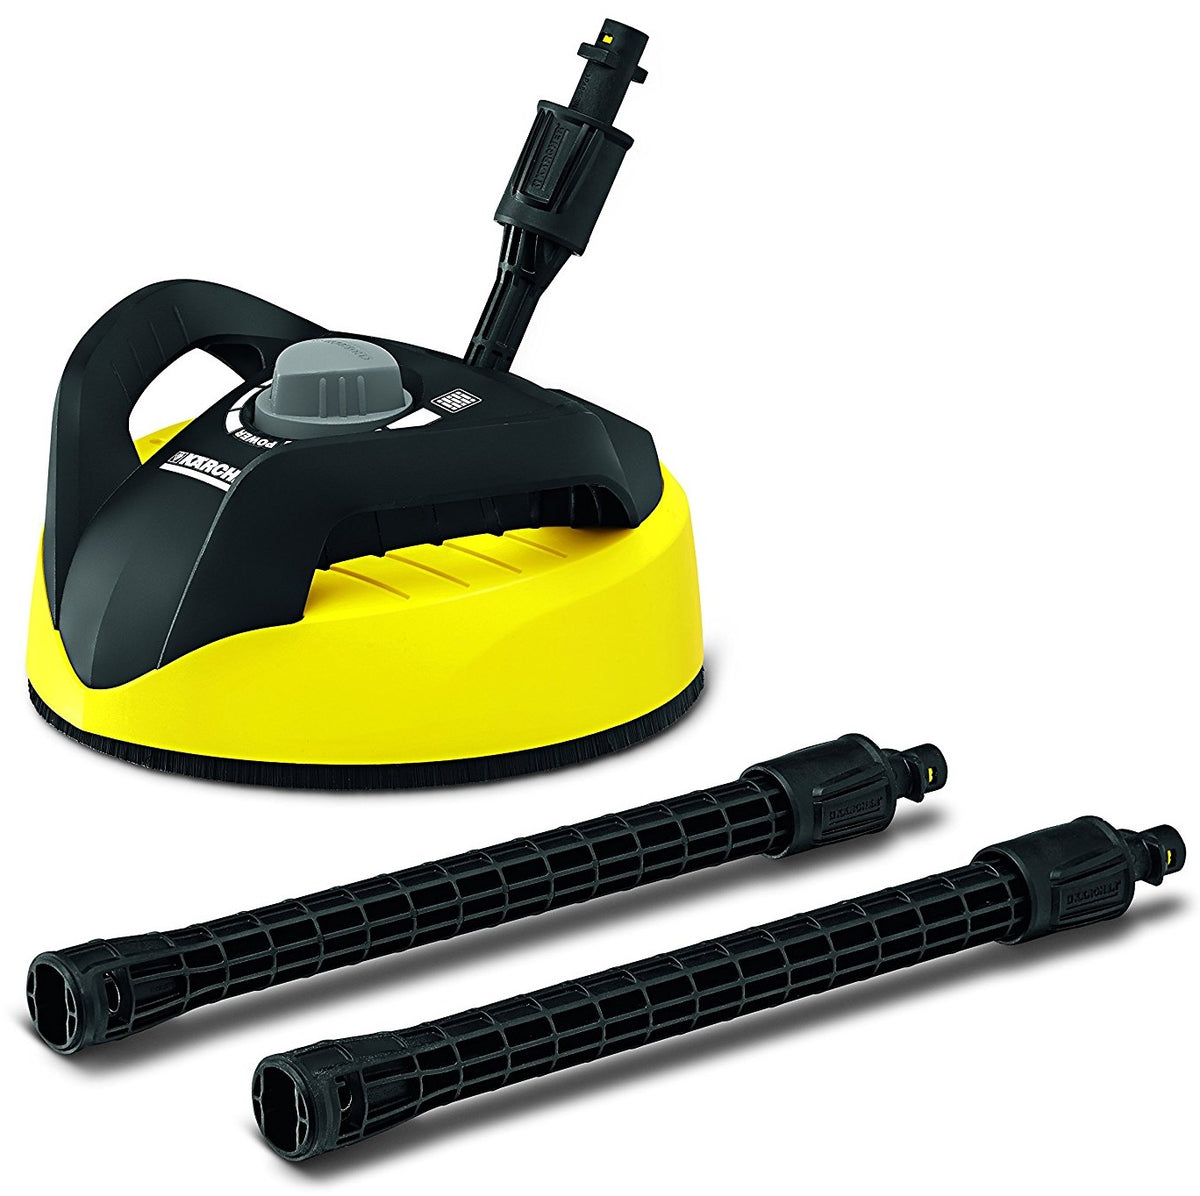 Karcher T300 Deck & Driveway Cleaner for Electric Pressure Washers